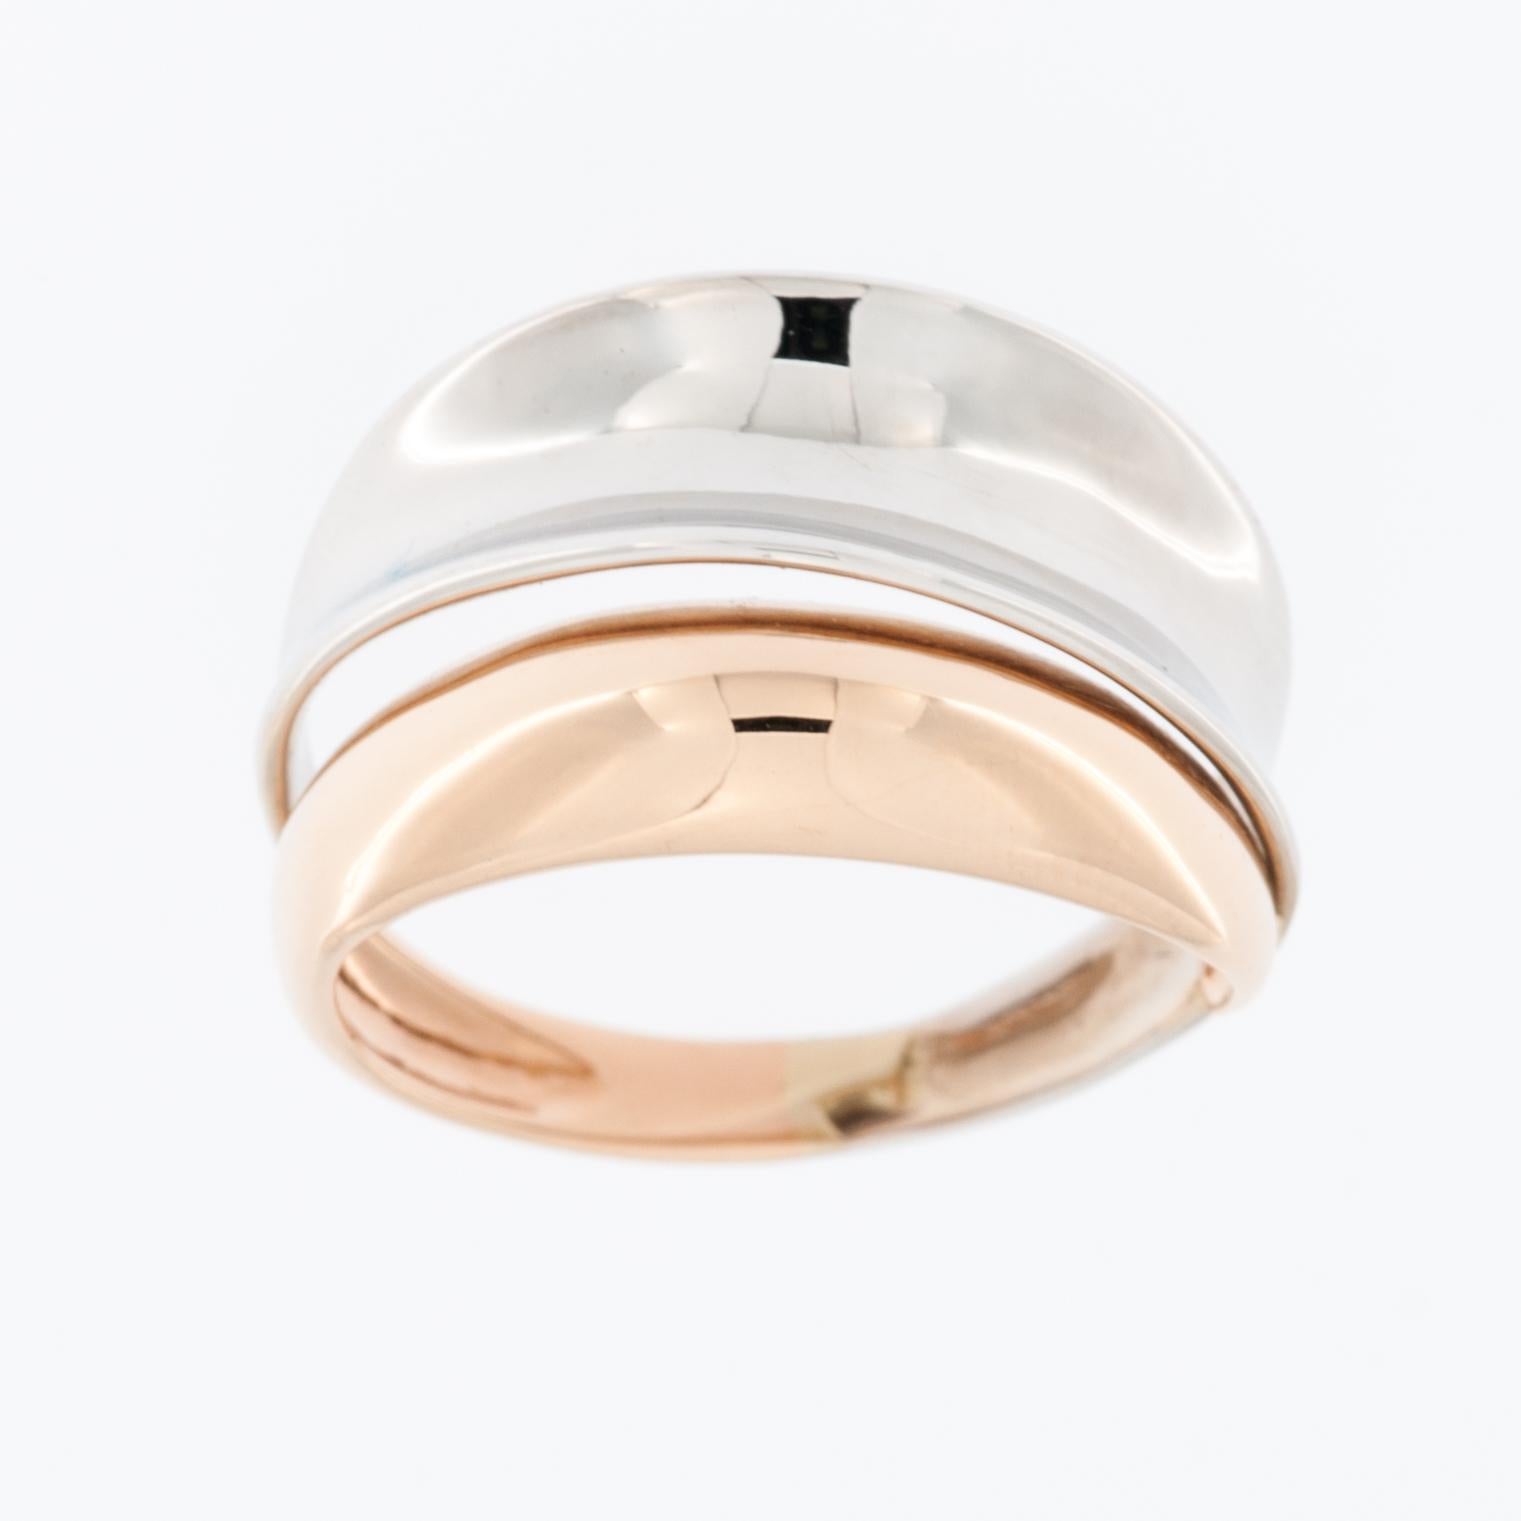 Modern and fashionable, this ring was created in Italy. It features a combination of 18kt rose gold and white gold, adding a unique and captivating contrast to the design.

The combination of rose gold and white gold adds depth and dimension to the